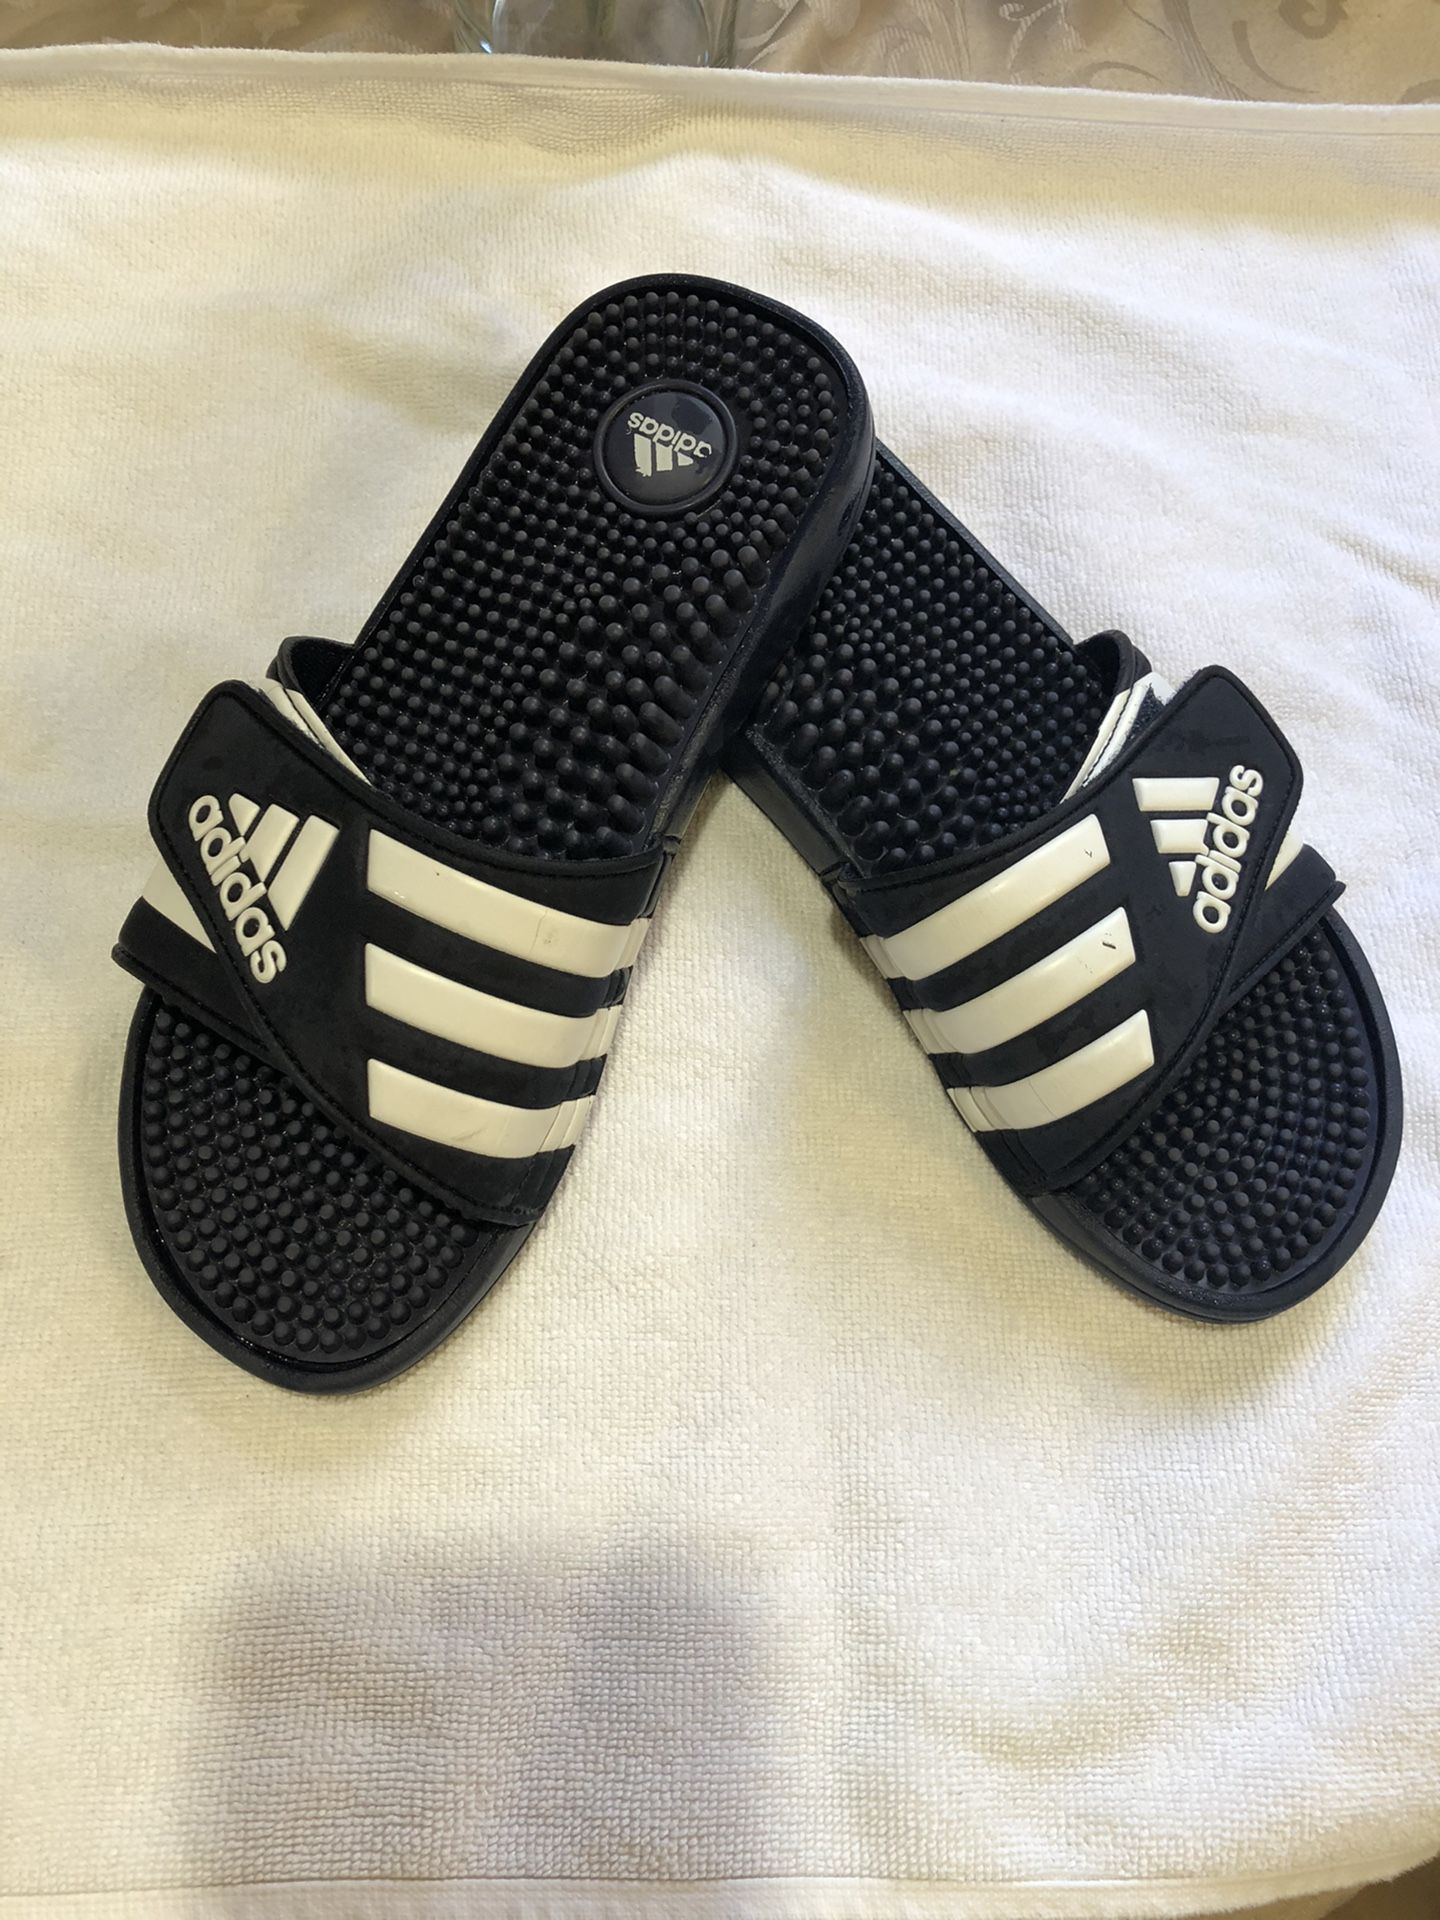 Adidas slides for men and women